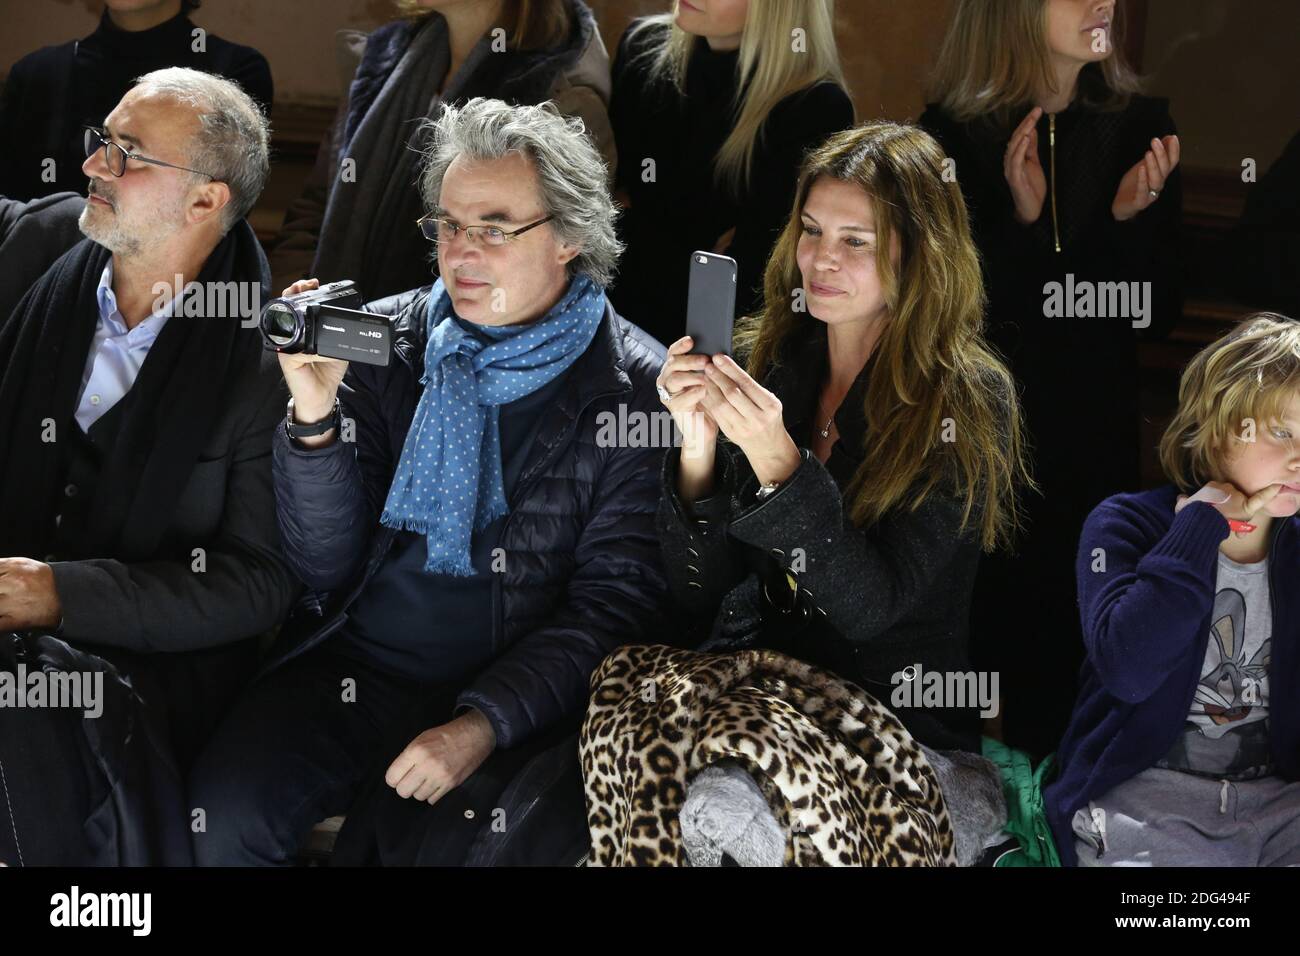 Jean-Christophe Grange and his wife attending the Bonpoint collection  Winter 2017 show as part of Paris Fashion Week on January 25, 2017 in  Paris, France. Photo by Jerome Domine/ABACAPRESS.COM Stock Photo -